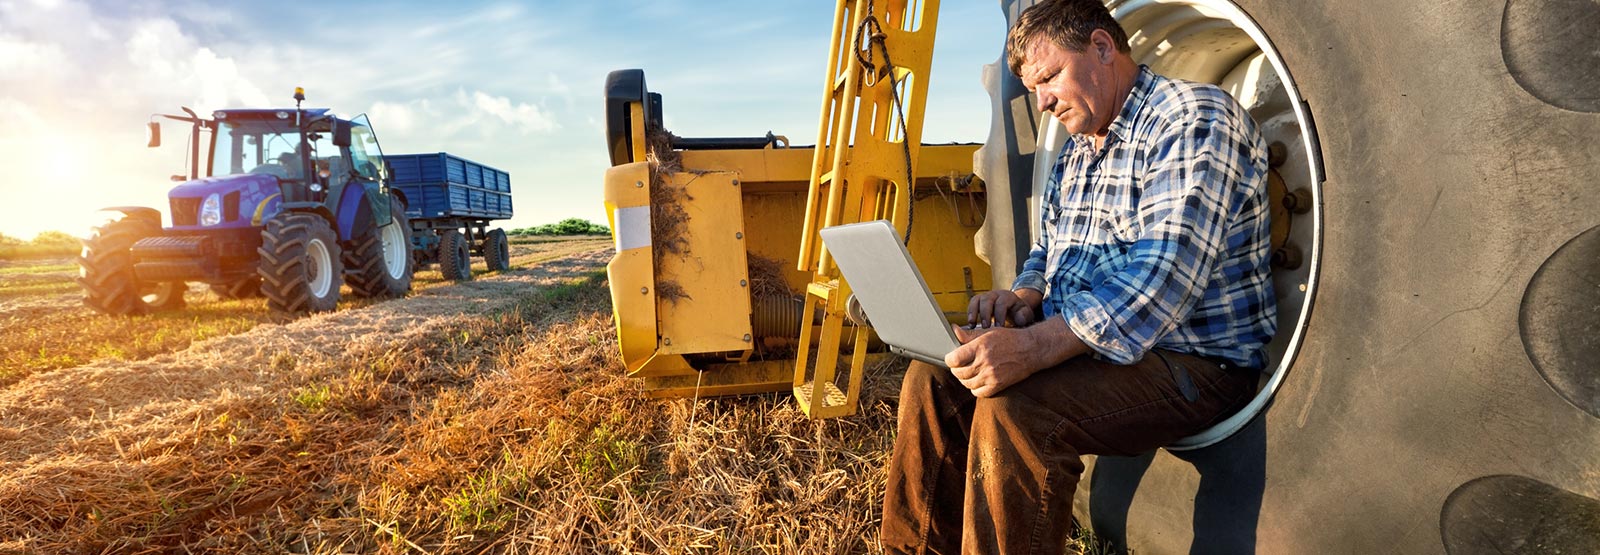 A farmer using laptop computer around agricultural equipment